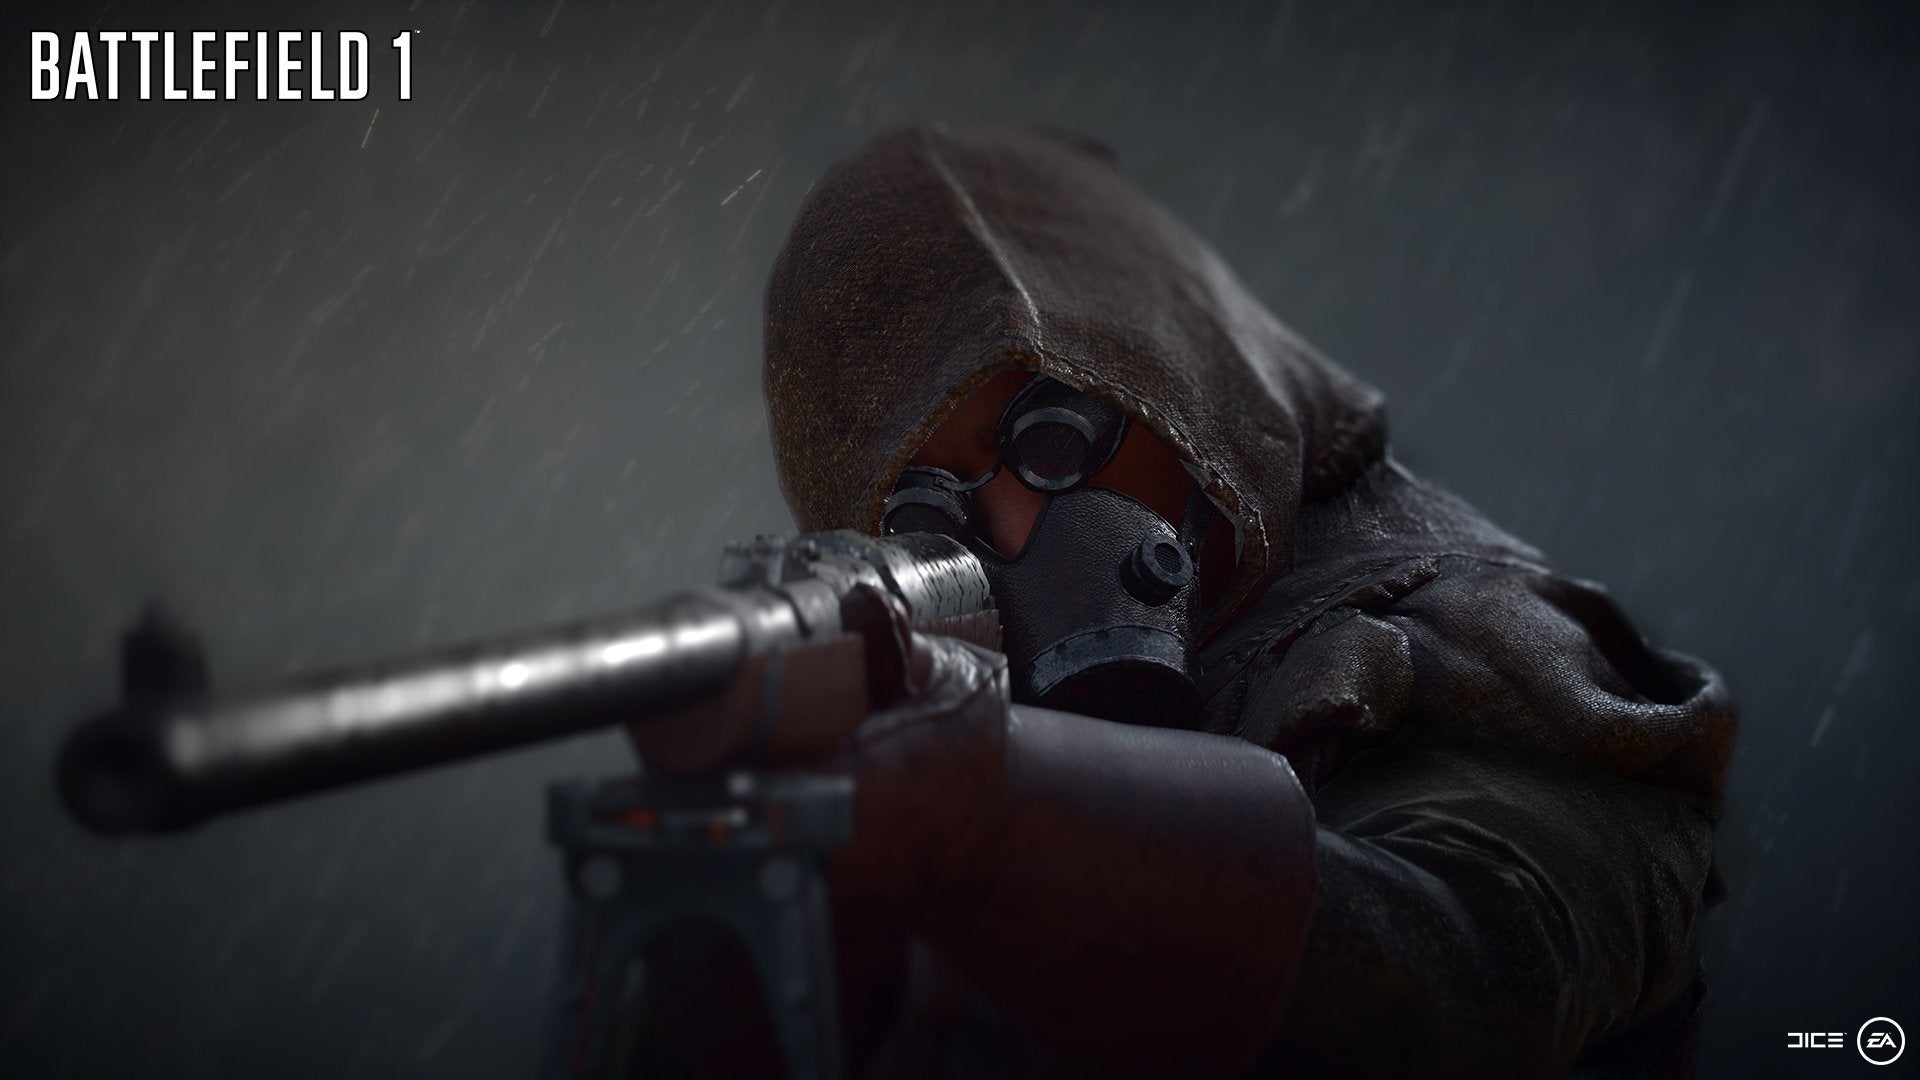 Battlefield 1 will make rather large changes to Scouting class